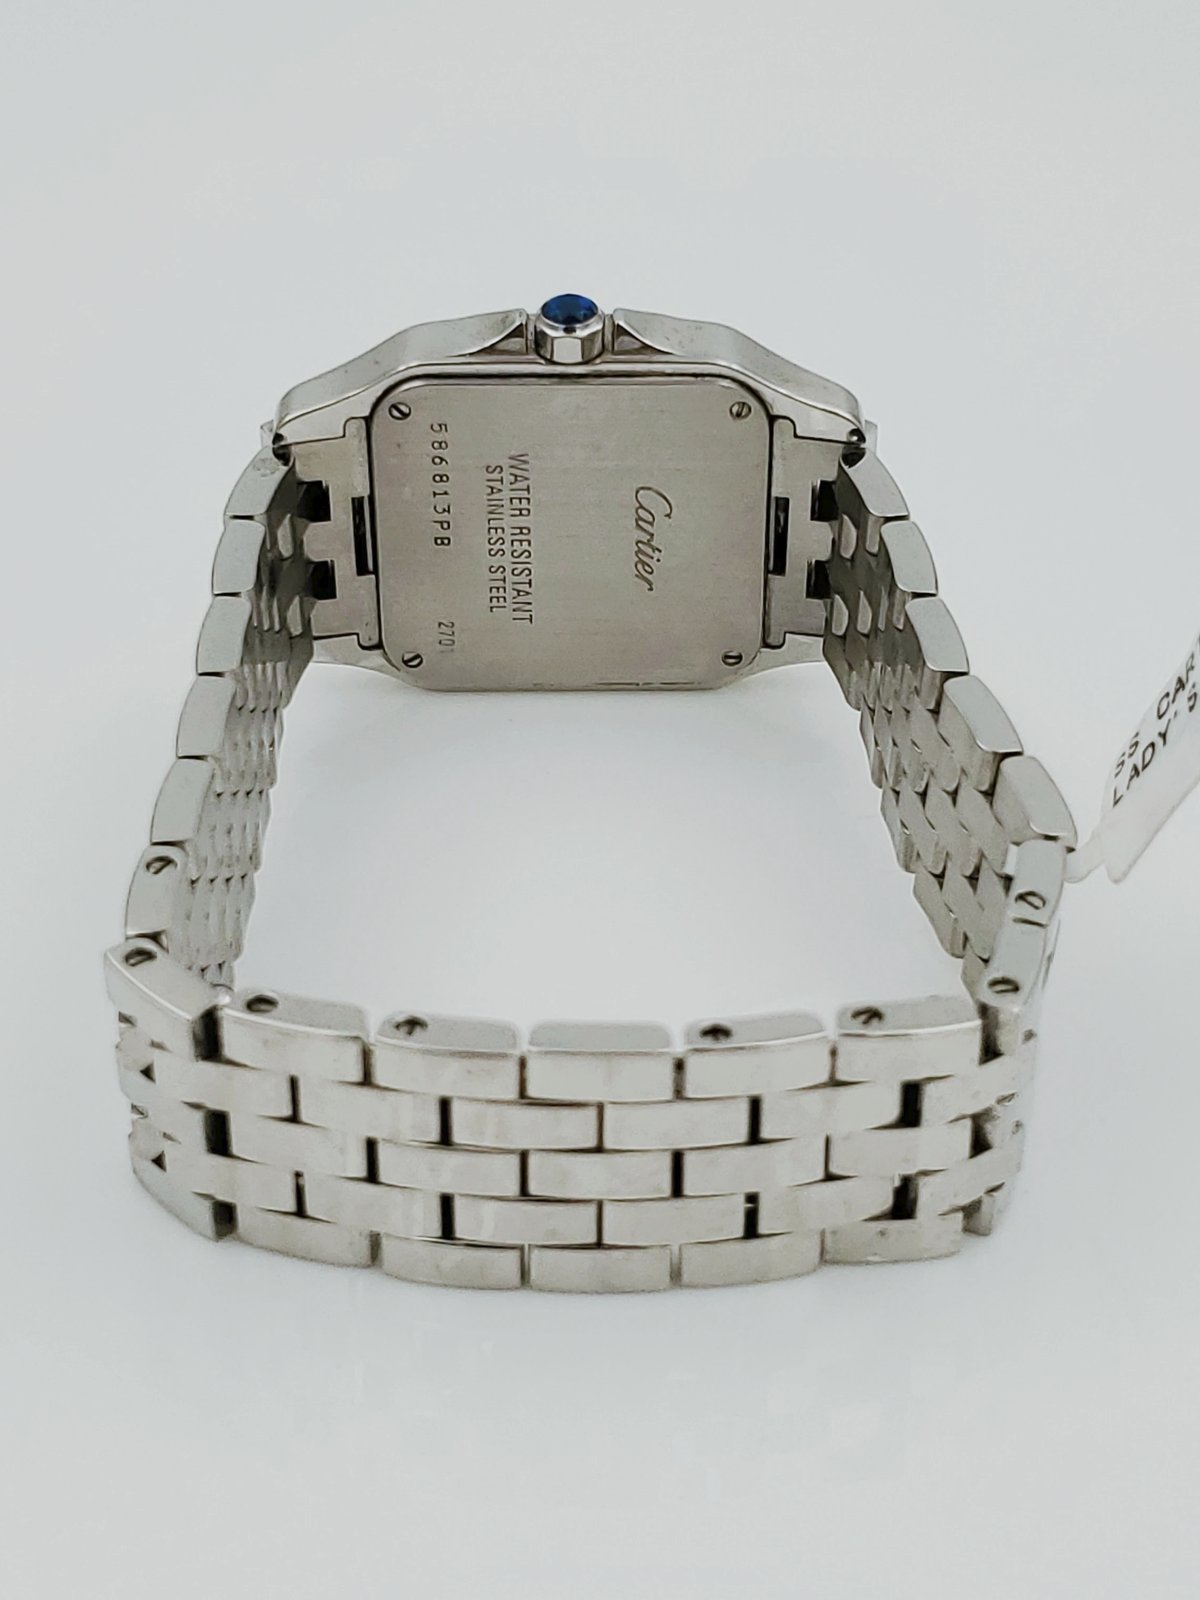 Ladies Medium Cartier Panthere Watch In Polished Finish. (Pre-Owned W25065Z5)